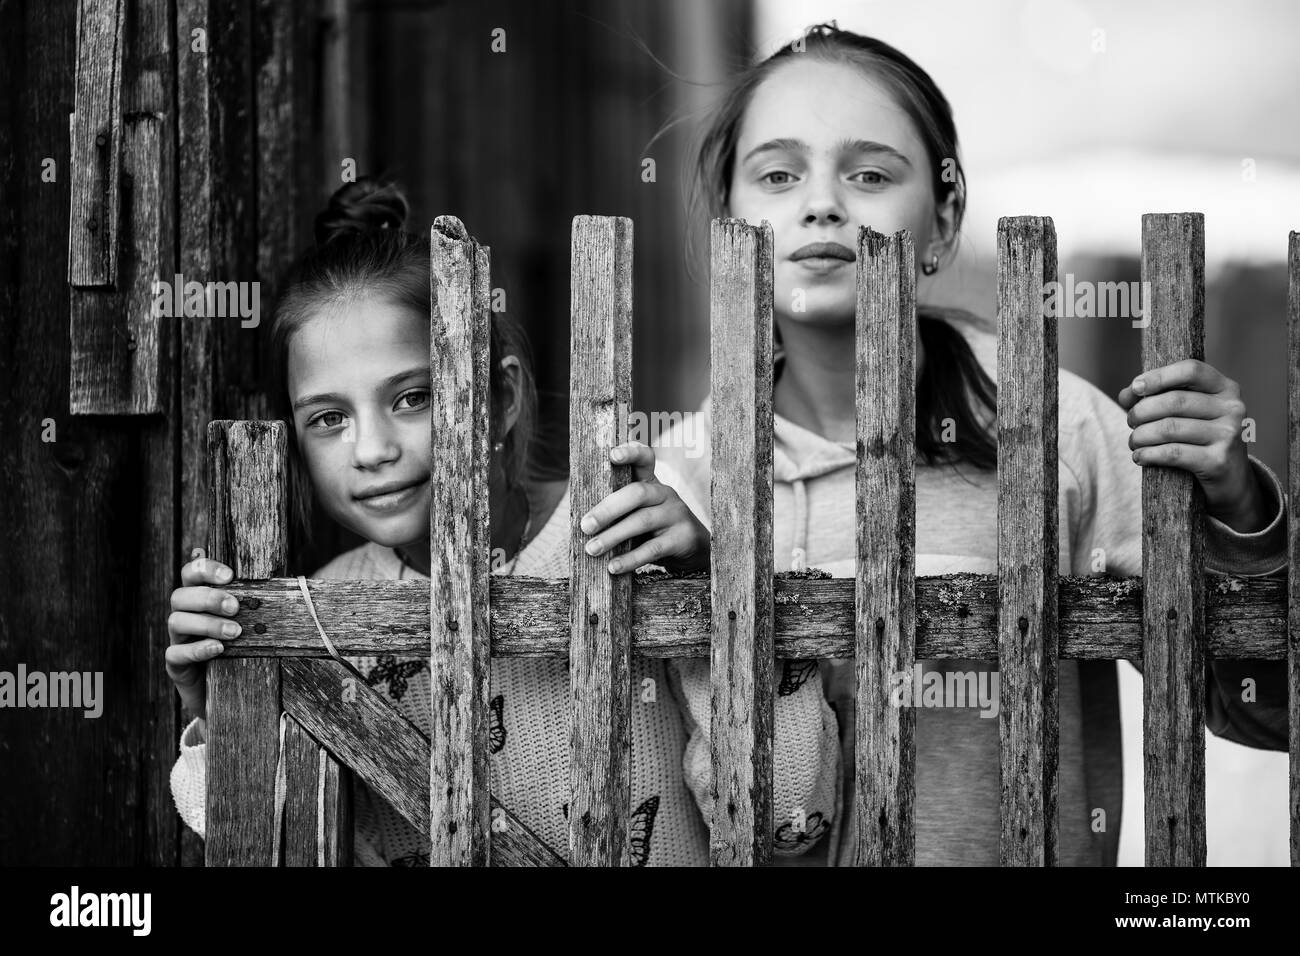 Two girls sisters or girlfriends having fun outdoors at Village. Looking into the camera. Black and white photo. Stock Photo